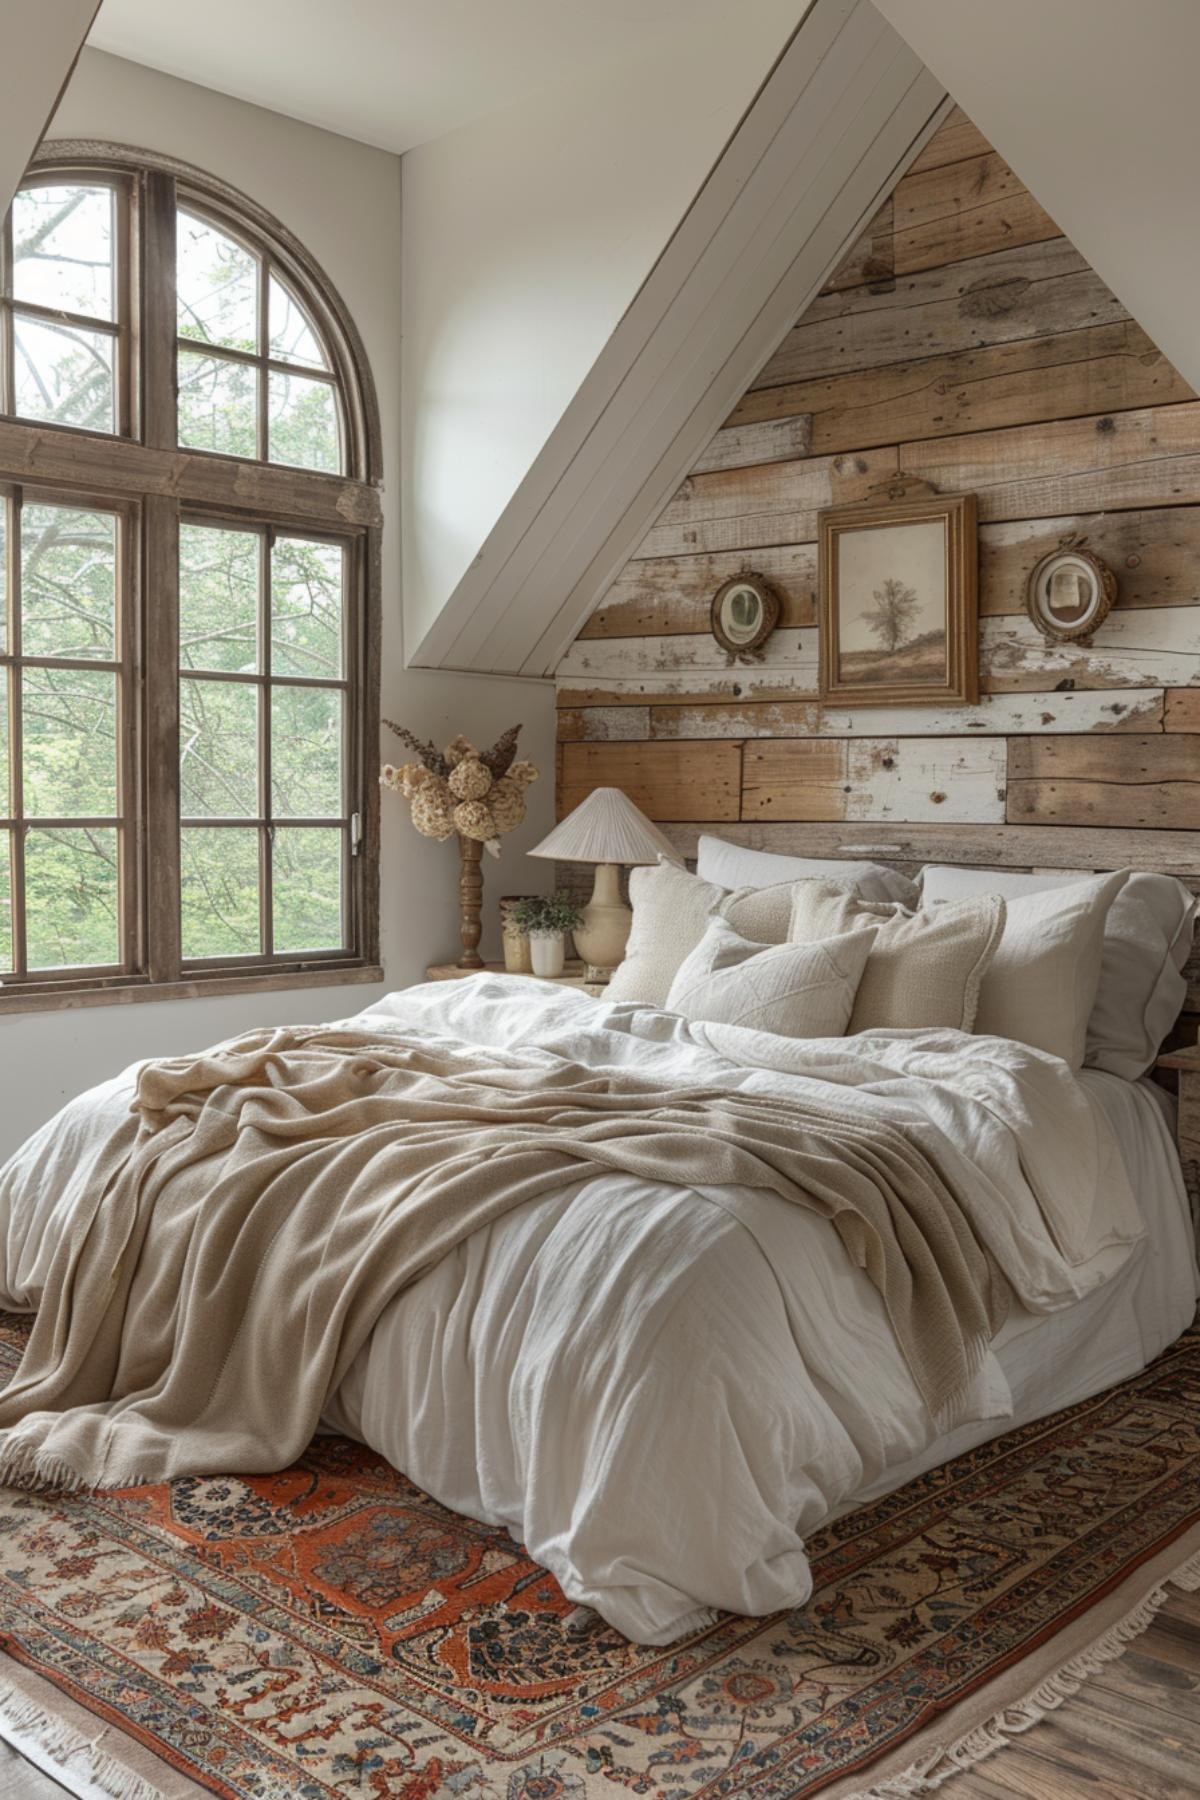 Country Rustic